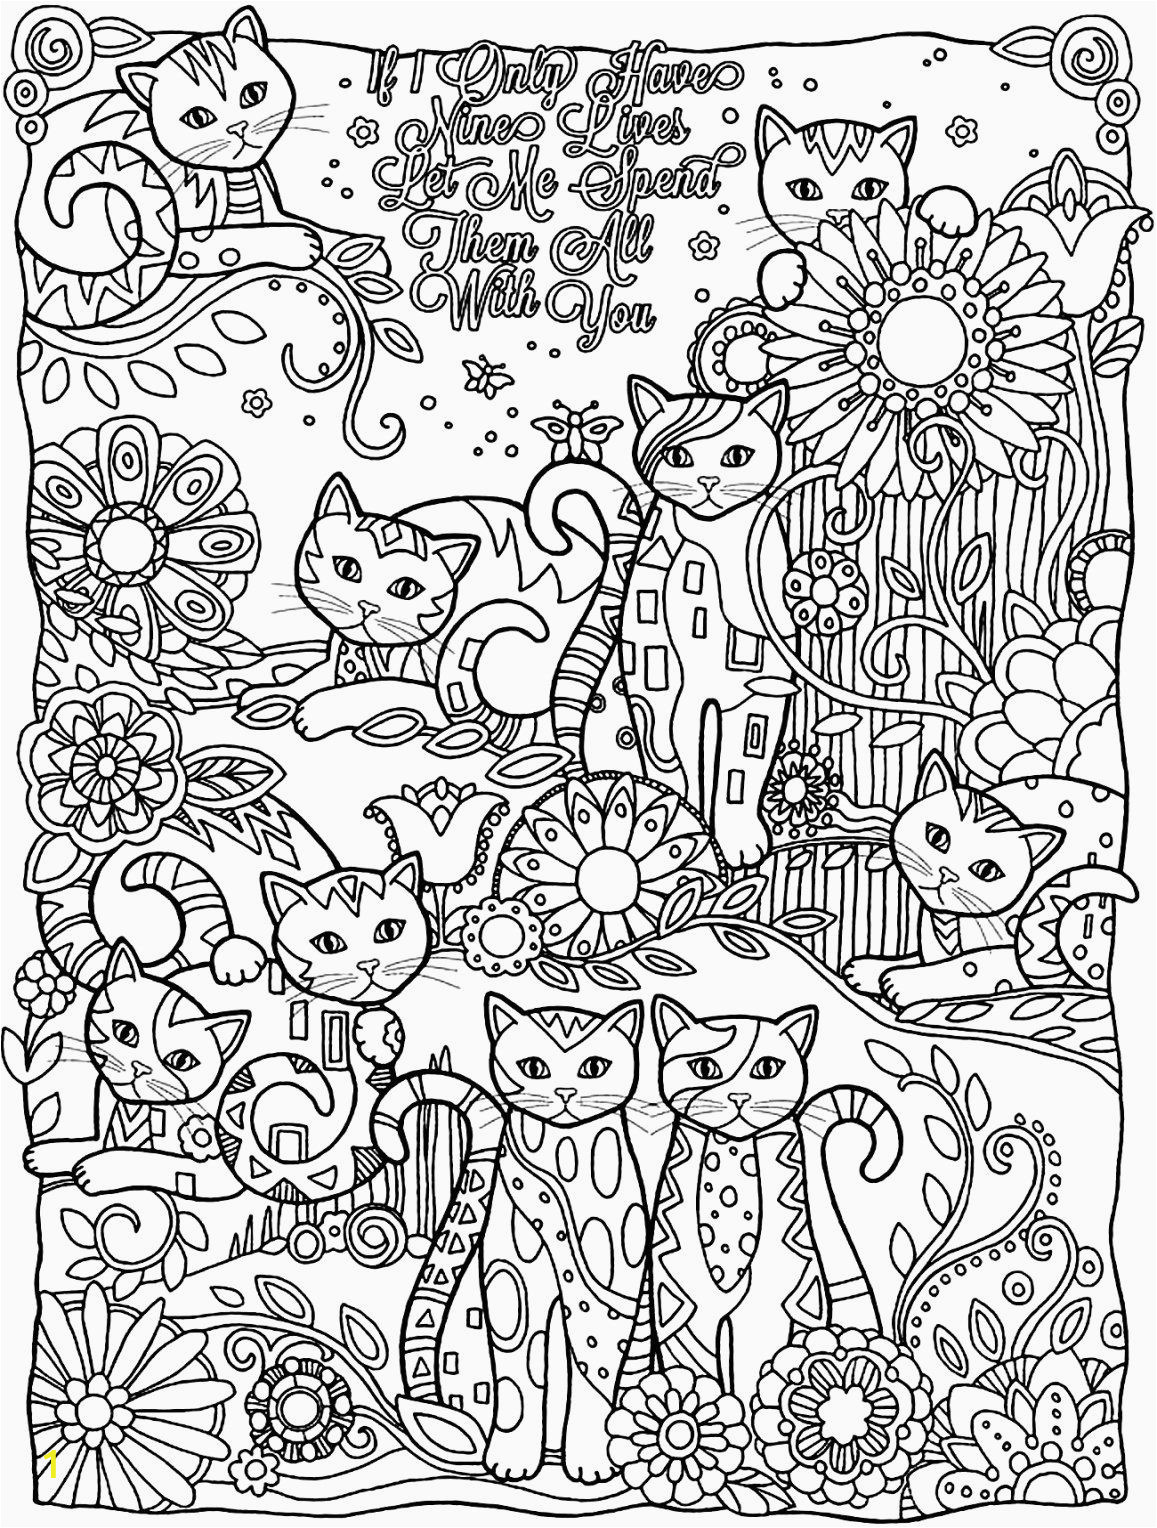 Cute Coloring Pages Free Printable Pin On Best Printable Coloring Pages